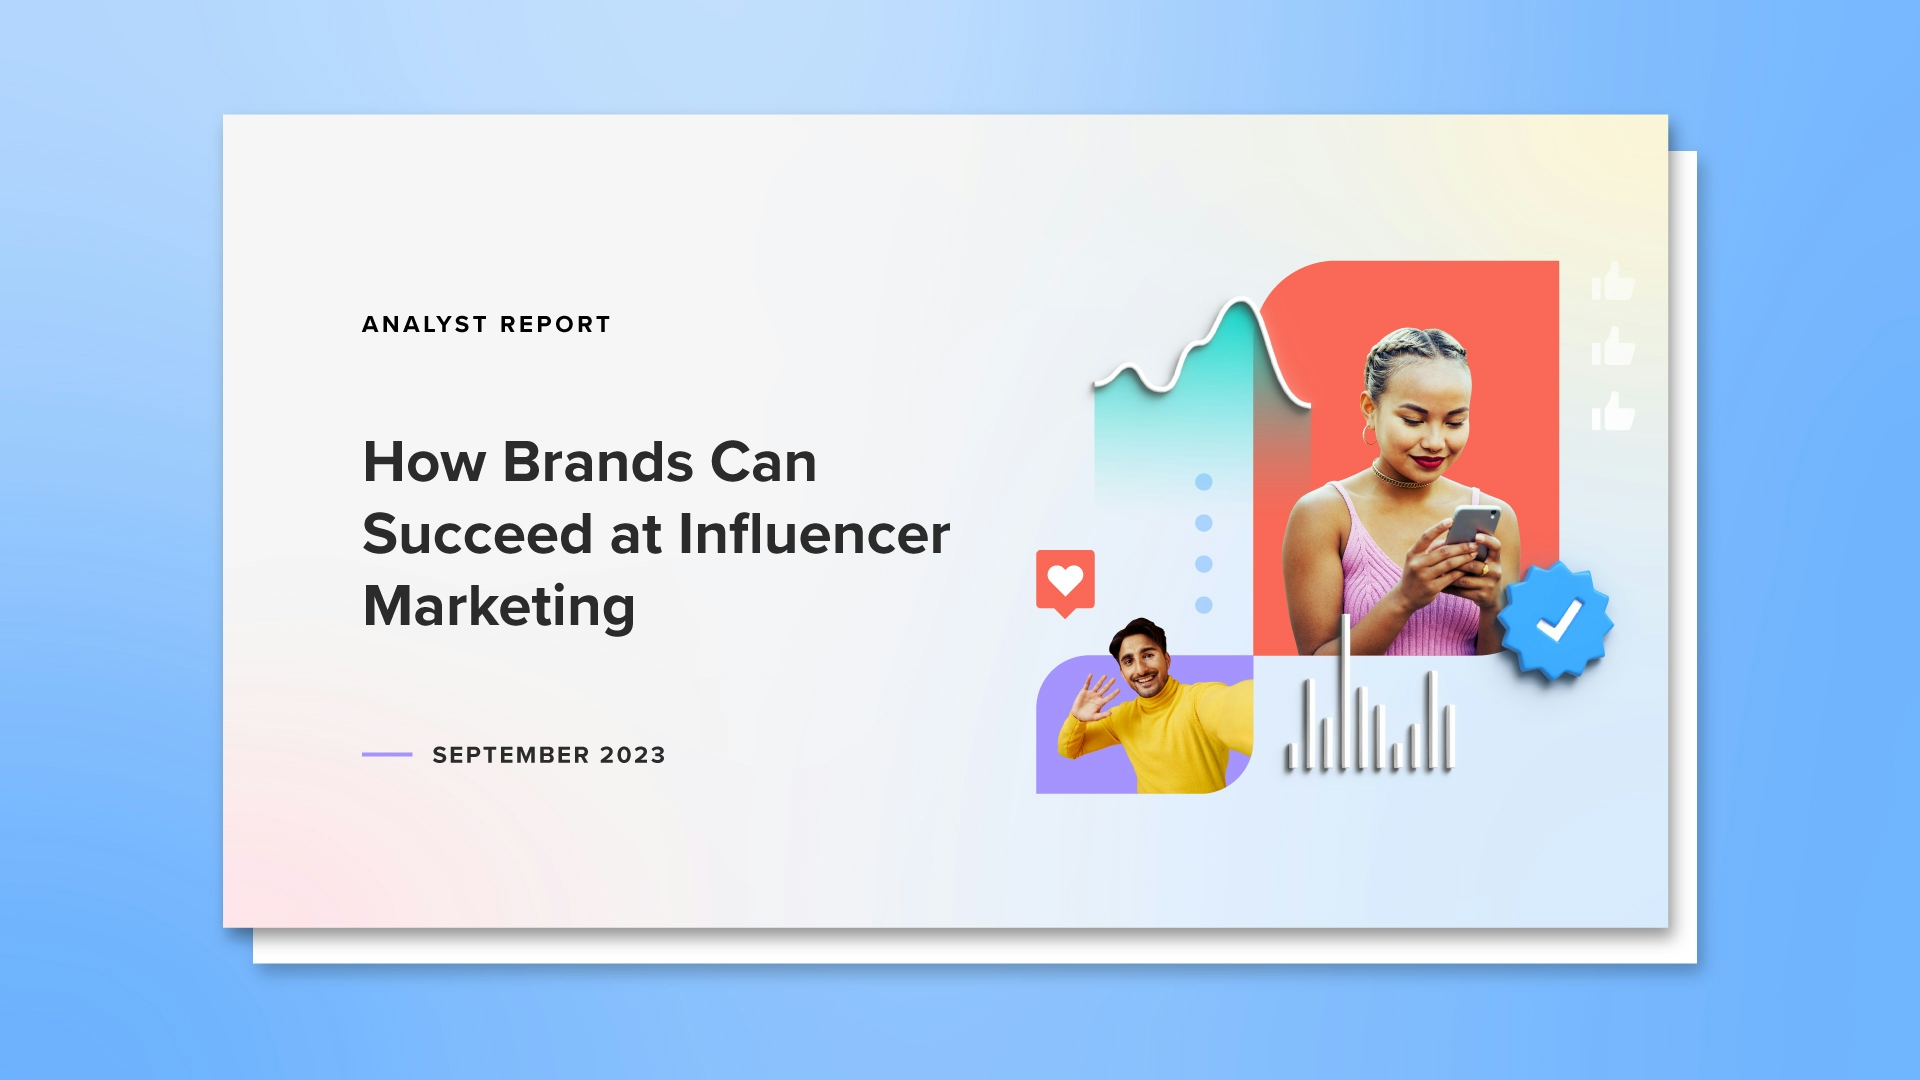 Download the Report: How Brands Can Succeed at Influencer Marketing